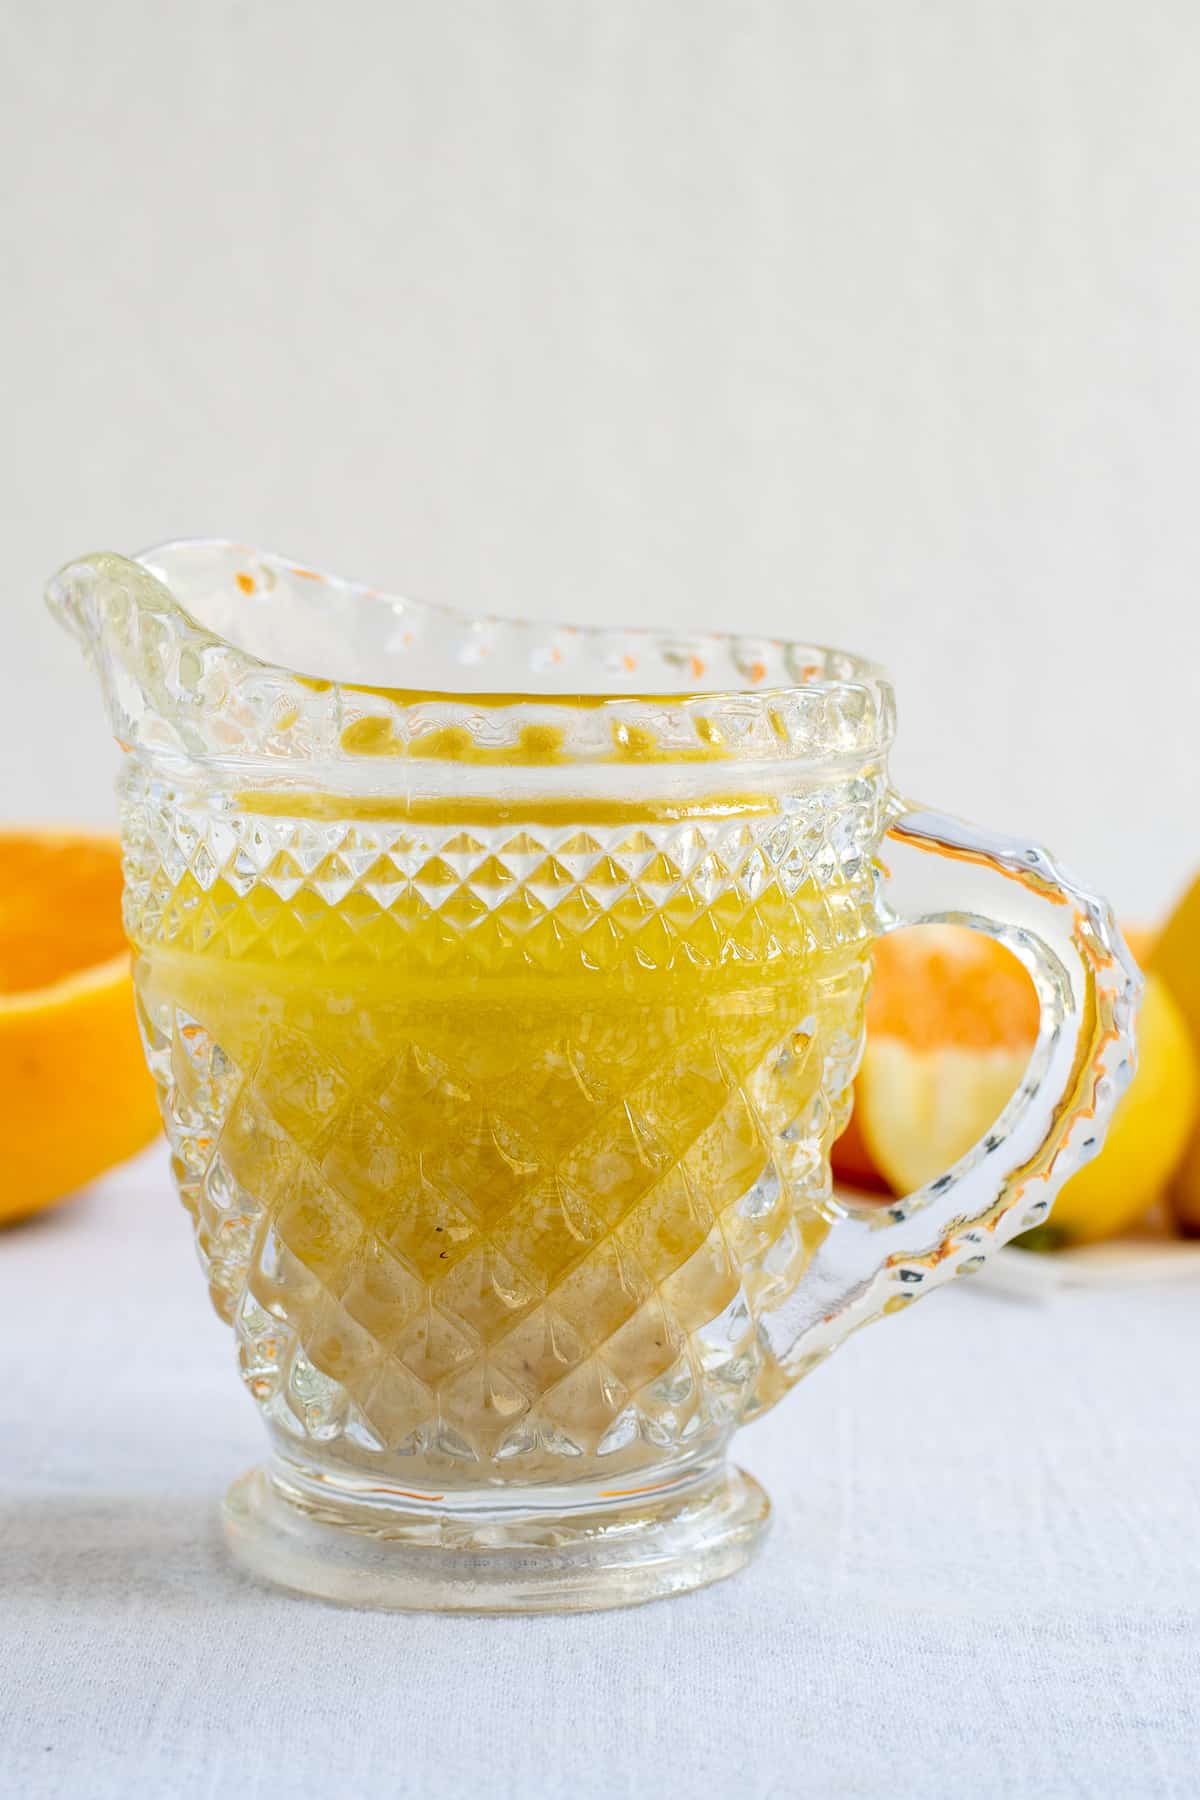 citrus salad dressing in glass pitcher on white background with oranges